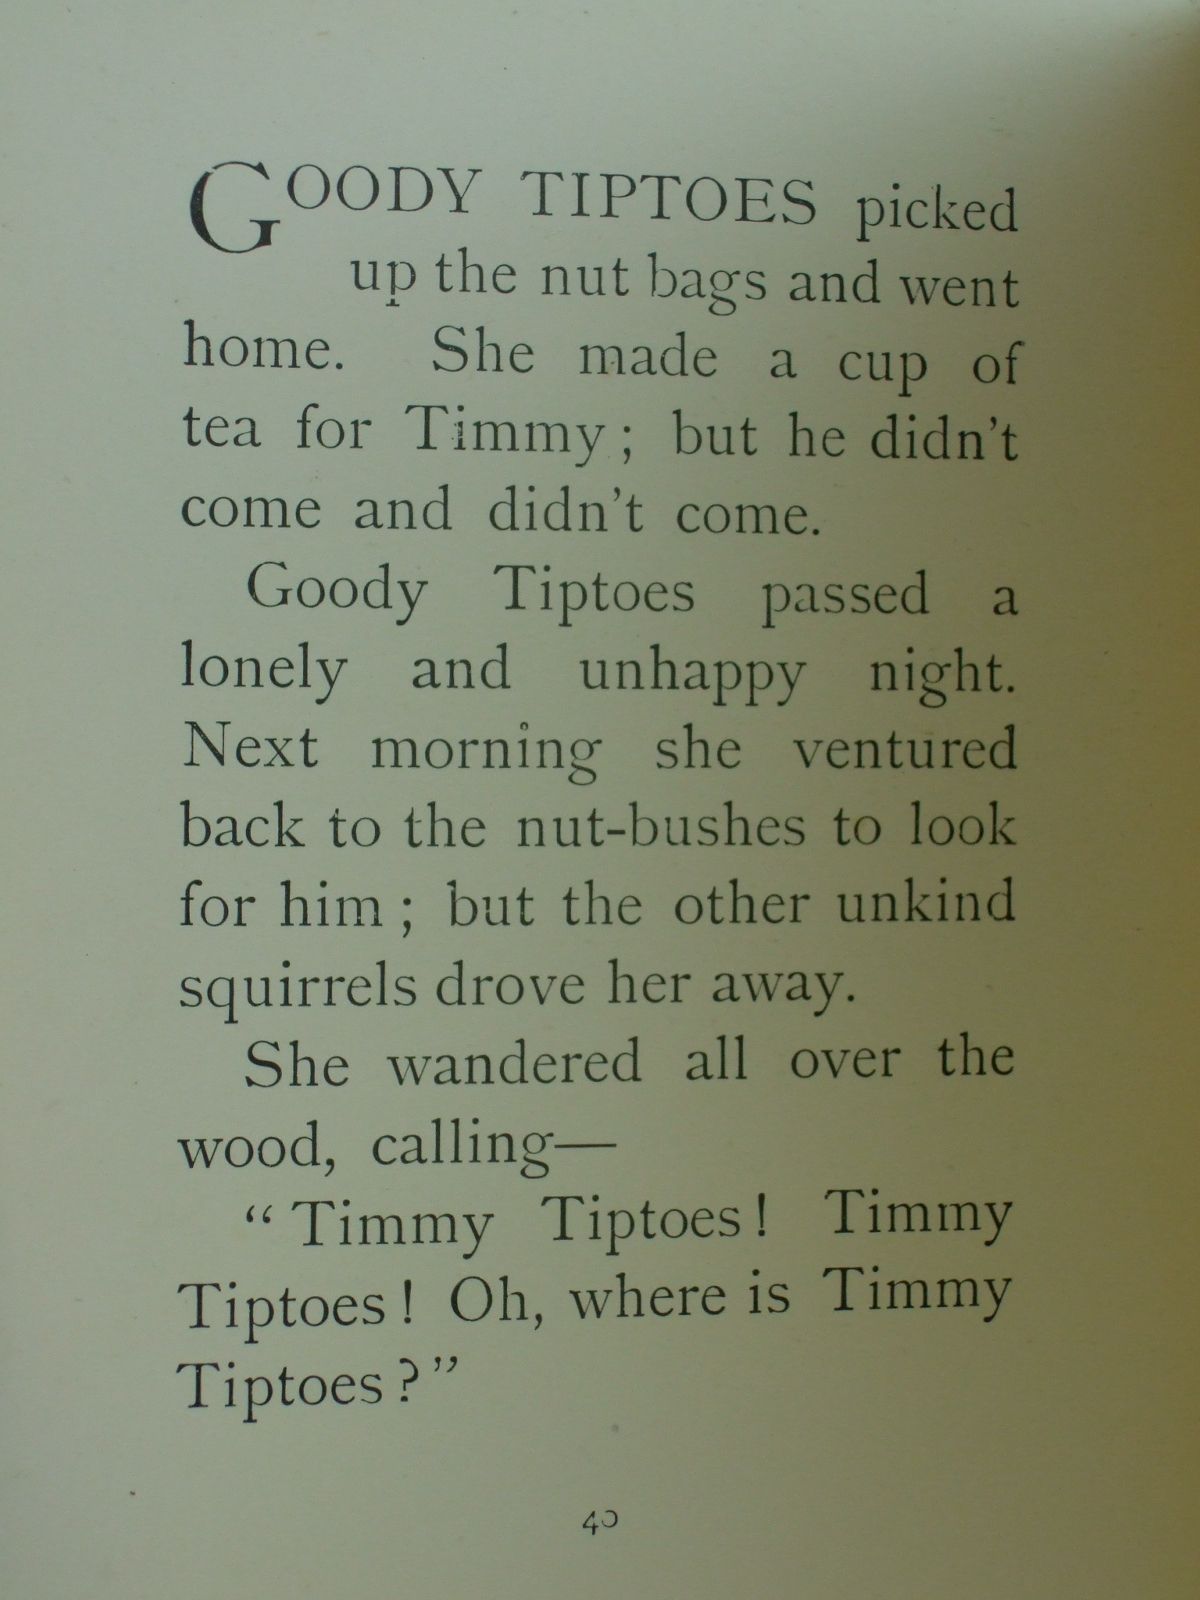 Photo of THE TALE OF TIMMY TIPTOES written by Potter, Beatrix illustrated by Potter, Beatrix published by Frederick Warne & Co. (STOCK CODE: 1108307)  for sale by Stella & Rose's Books